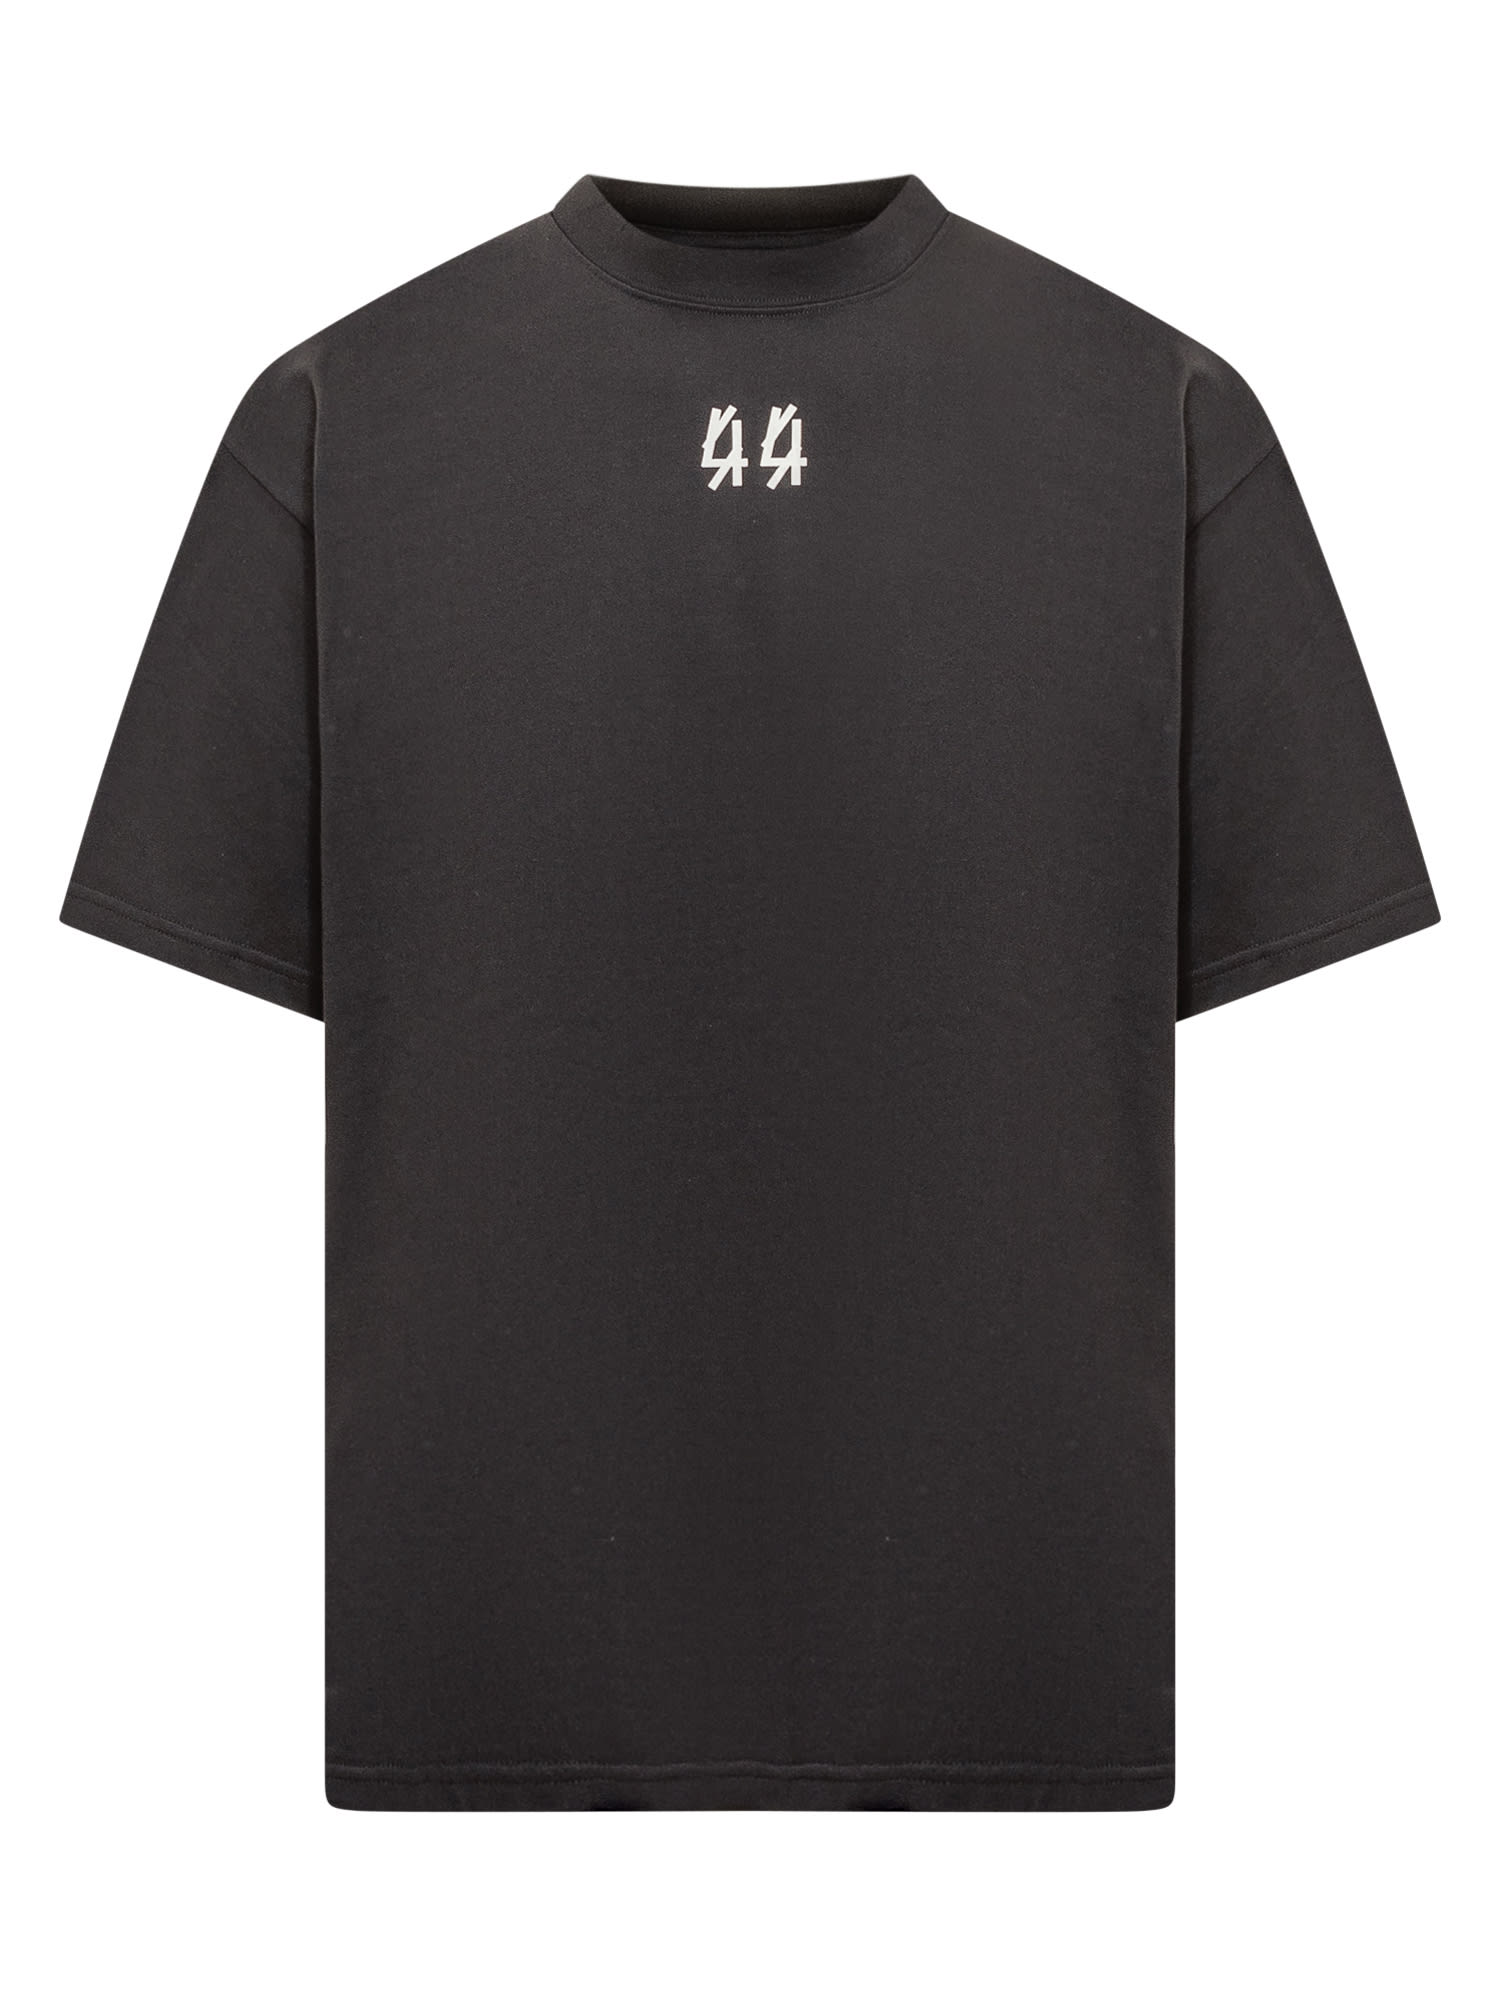 44 LABEL GROUP 44 T-SHIRT 44 LABEL GROUP